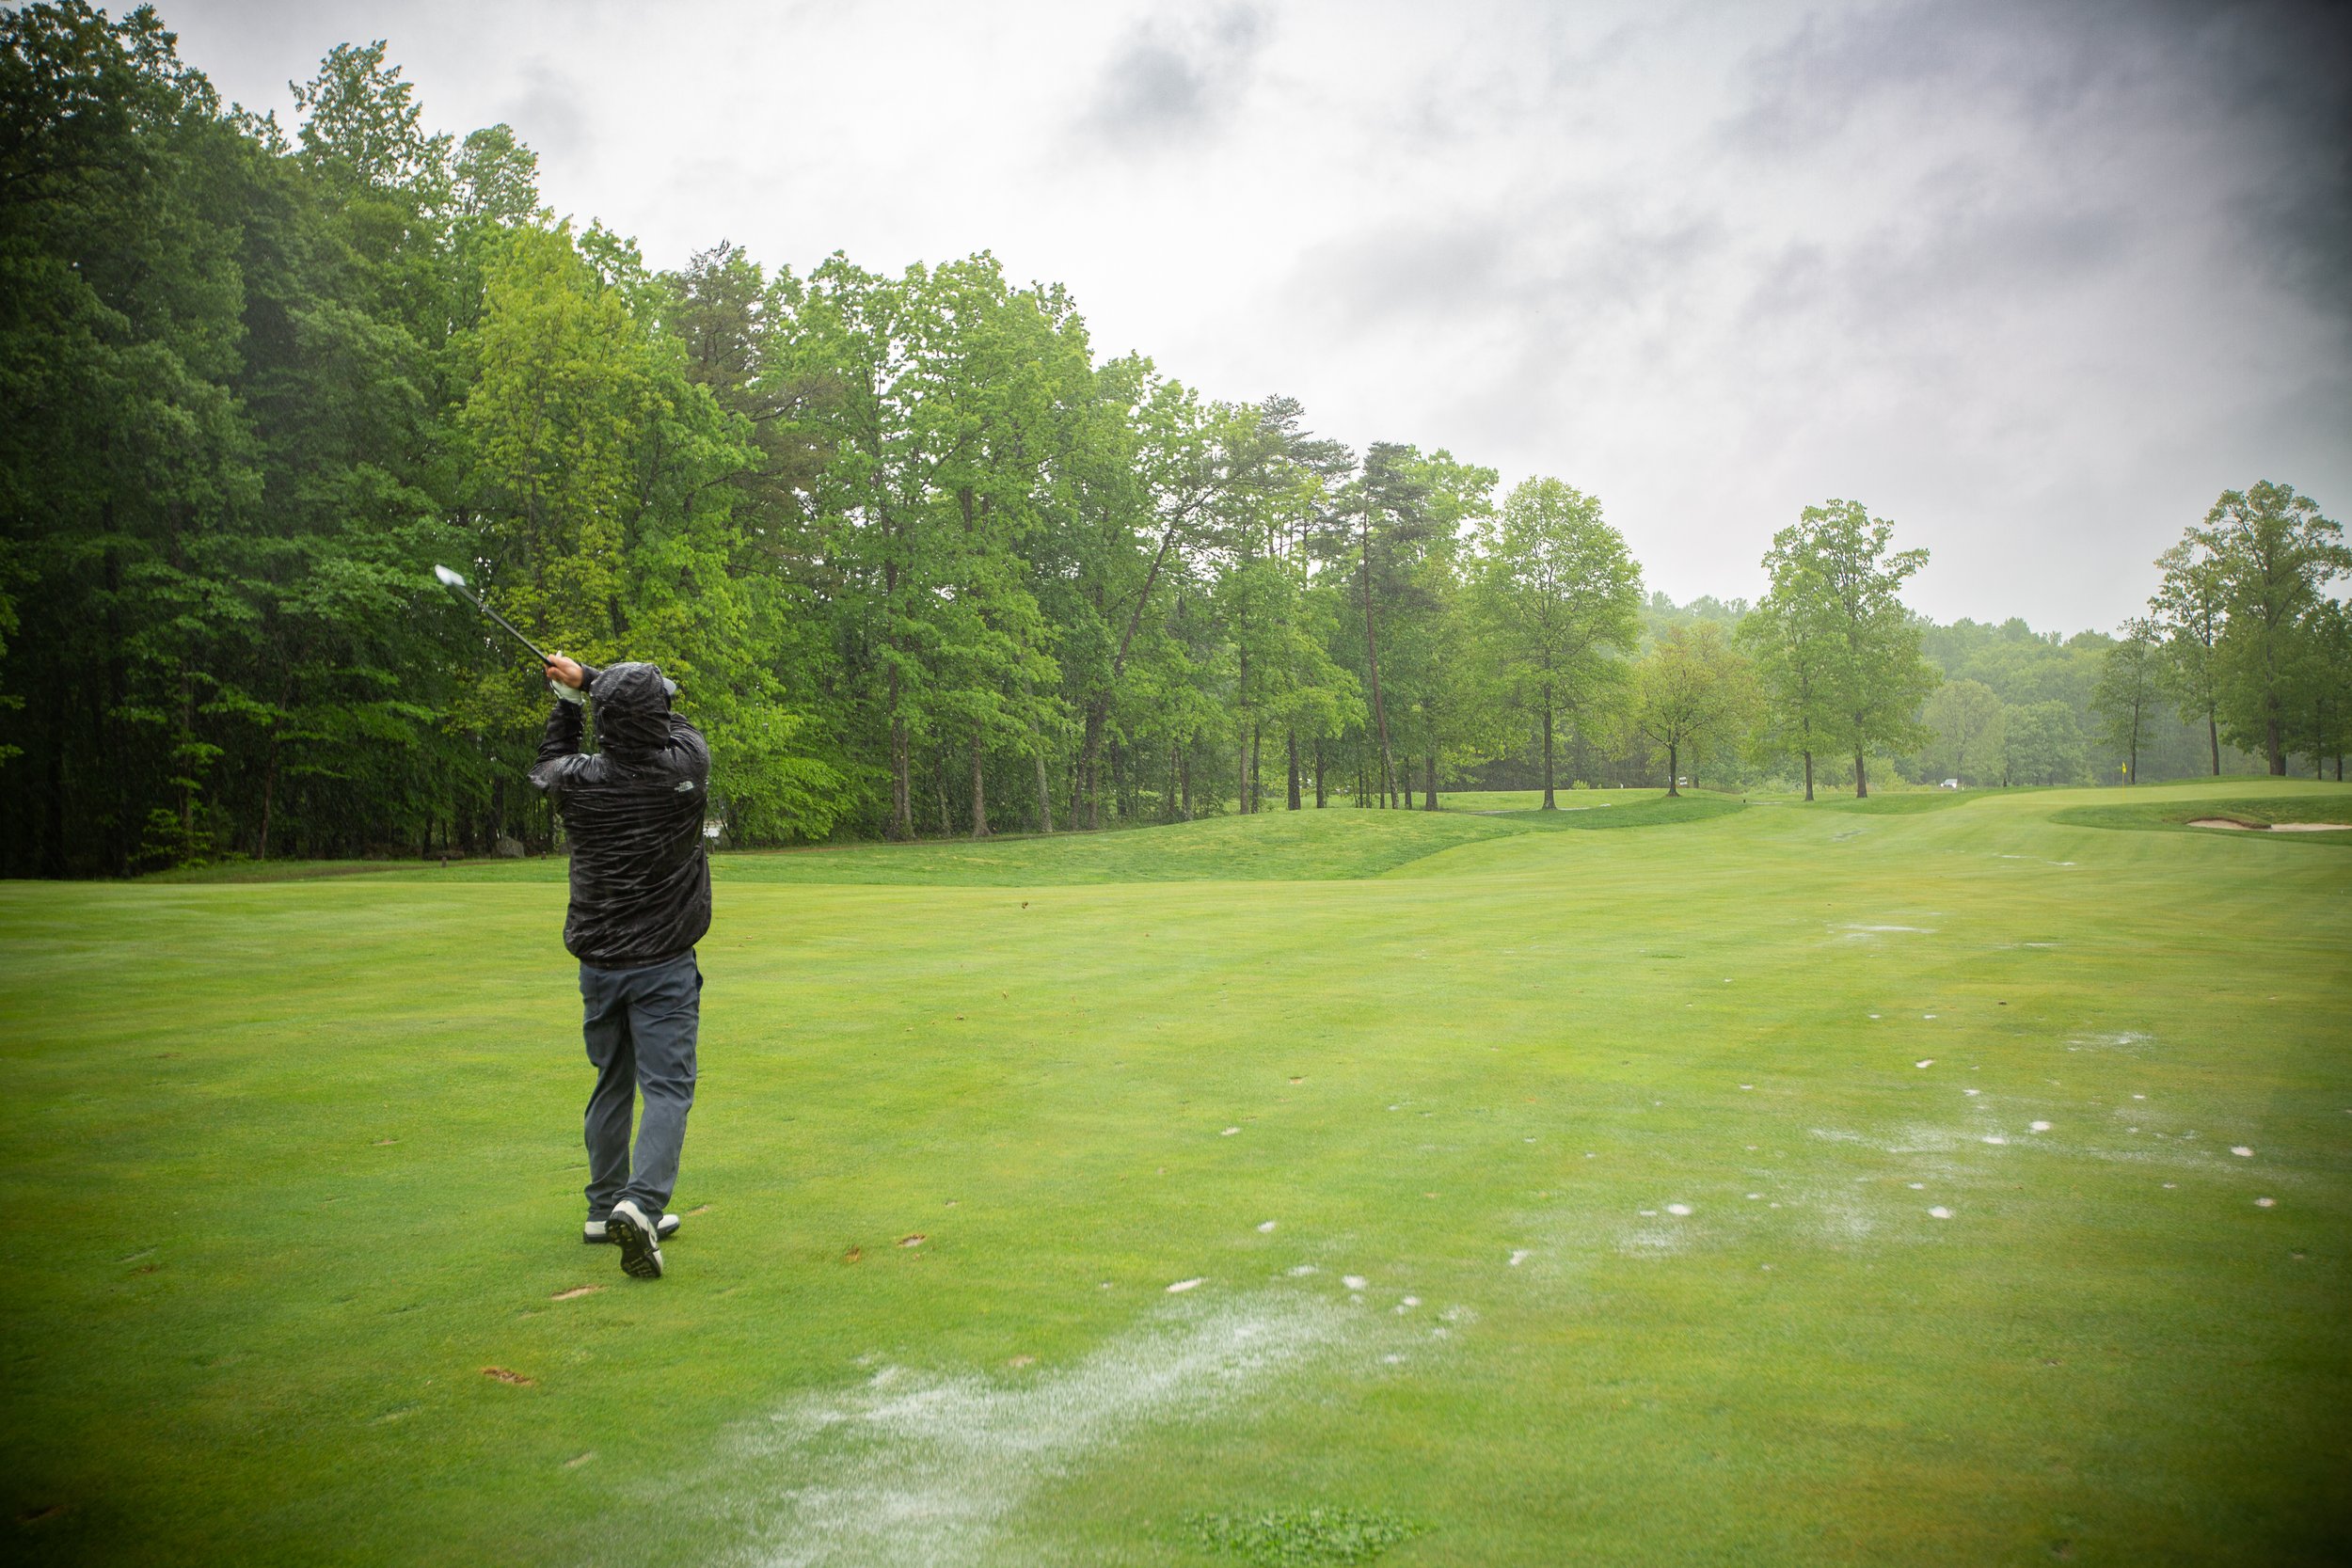 Golfer in the Black Jacket - What FormWG9A2890.jpg